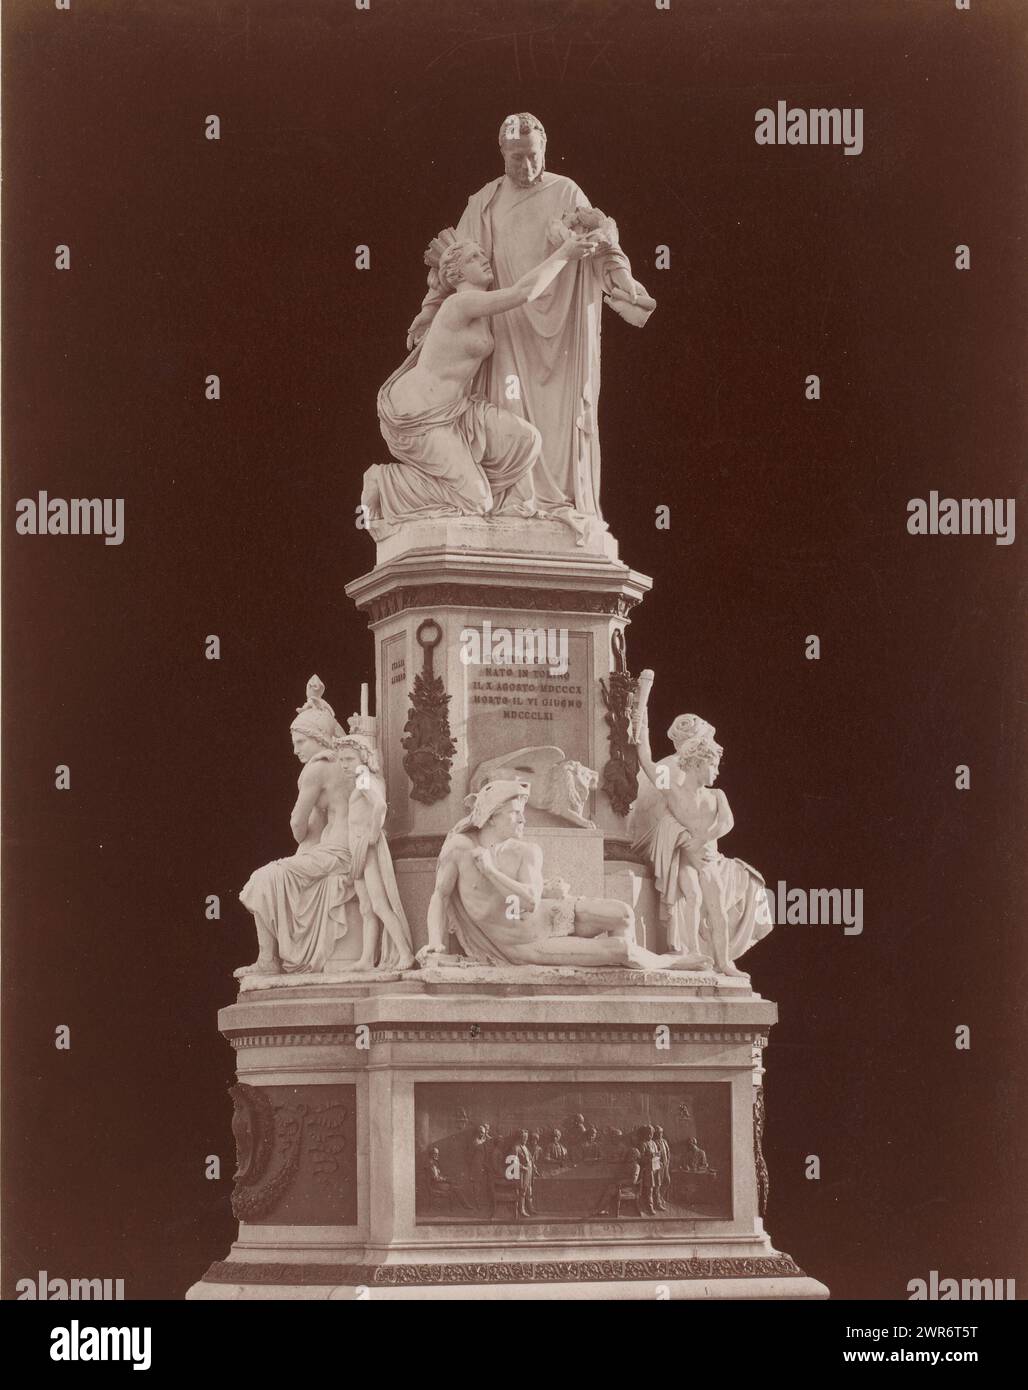 Monument to Camillo Cavour on the Piazza Carlo Emanuele II in Turin, Italy, Piazza Carlo Emanuele II. - Monumento a Camillo Cavour; Giovanni Dupré (title on object), Torino (series title on object), Giacomo Brogi, (attributed to), publisher: Edizione Brogi, (attributed to), after sculpture by: Giovanni Dupré, Turijn, publisher: Florence, 1873 - 1881, cardboard, albumen print, height 445 mm × width 318 mm, photograph Stock Photo